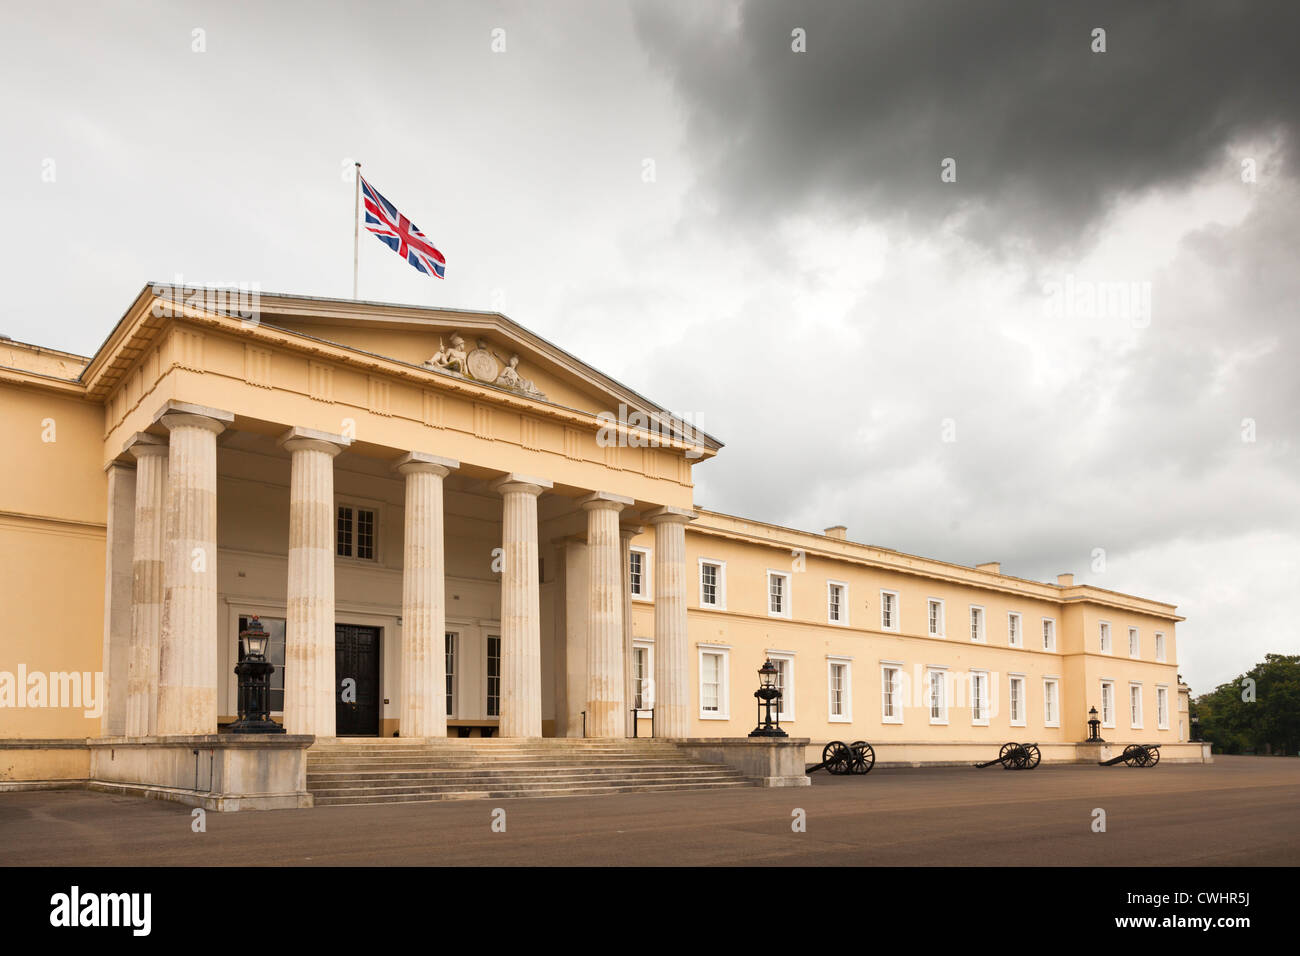 front facade of Old College Building Royal Military Academy Sandhurst Stock Photo